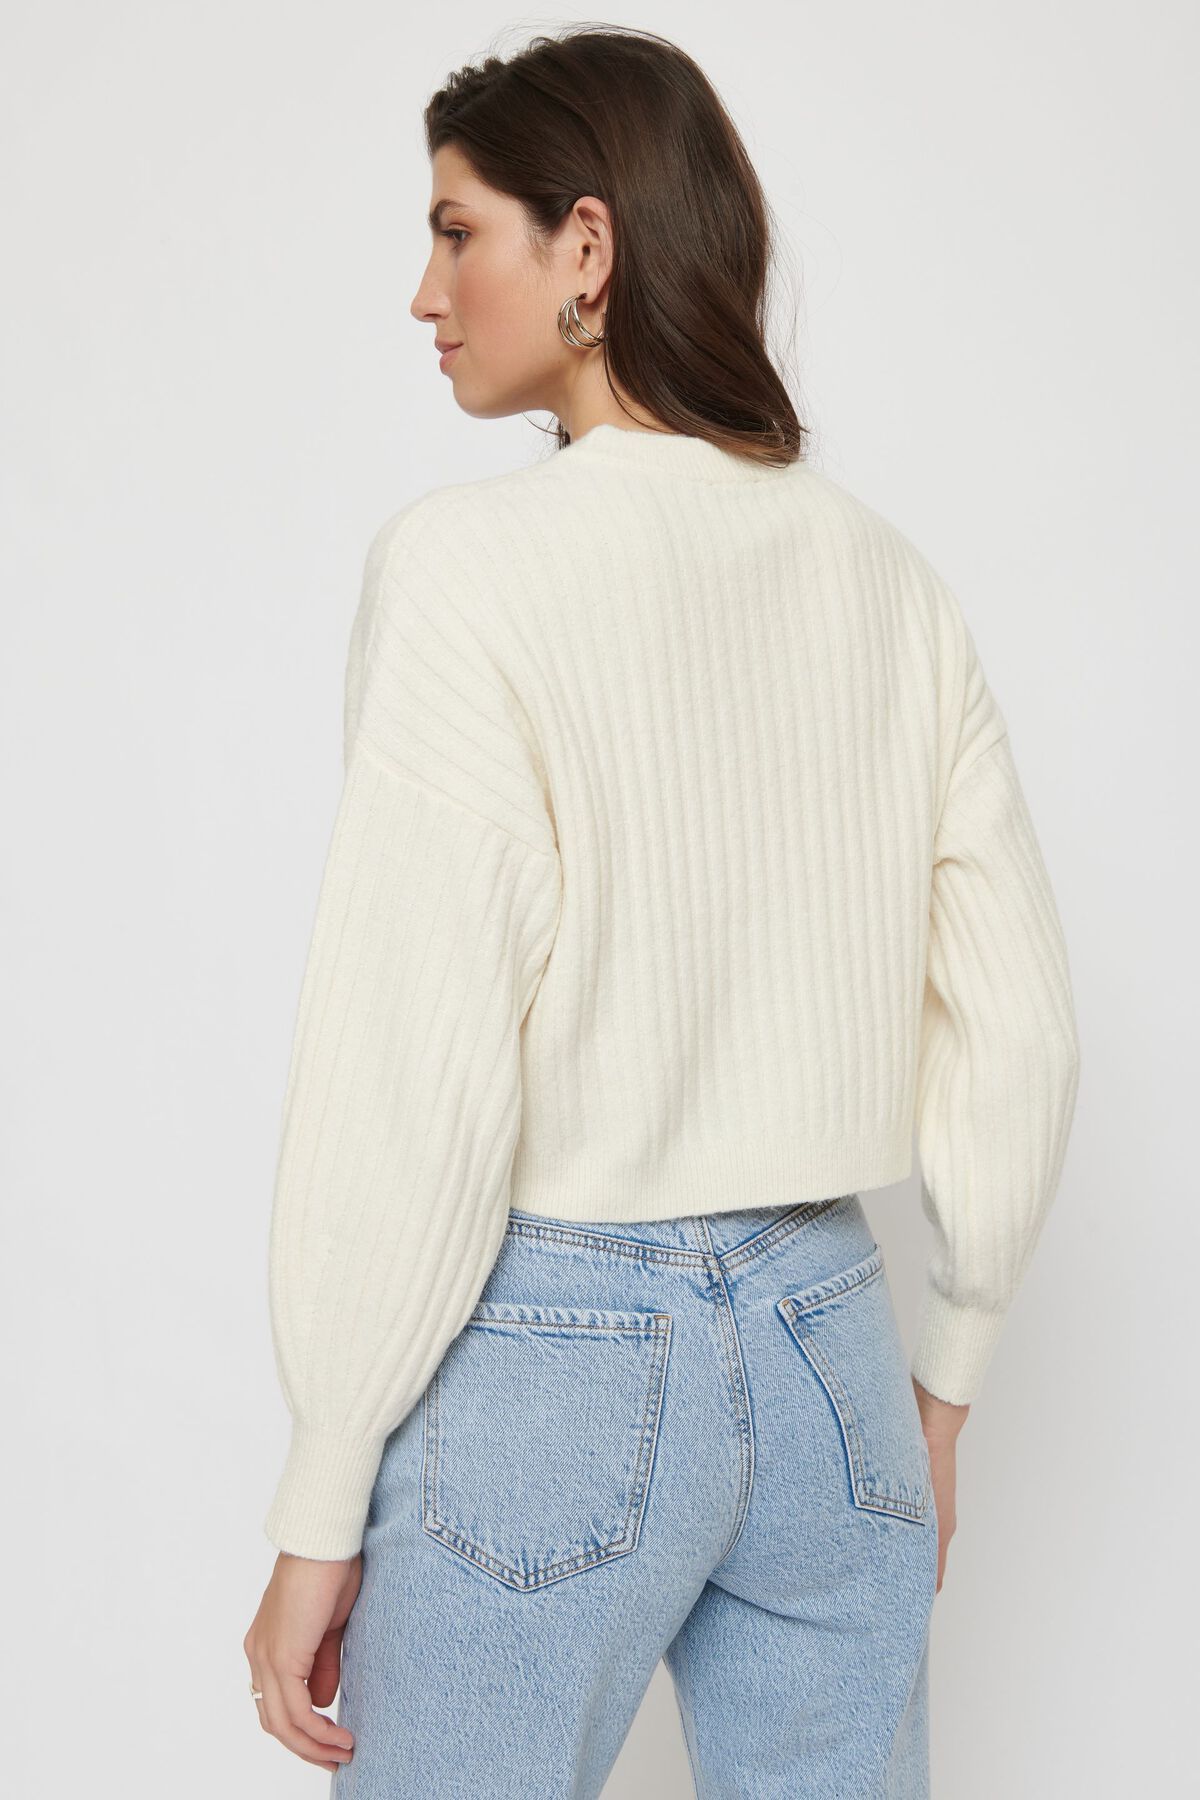 Dynamite Ribbed Crew Neck Sweater. 4